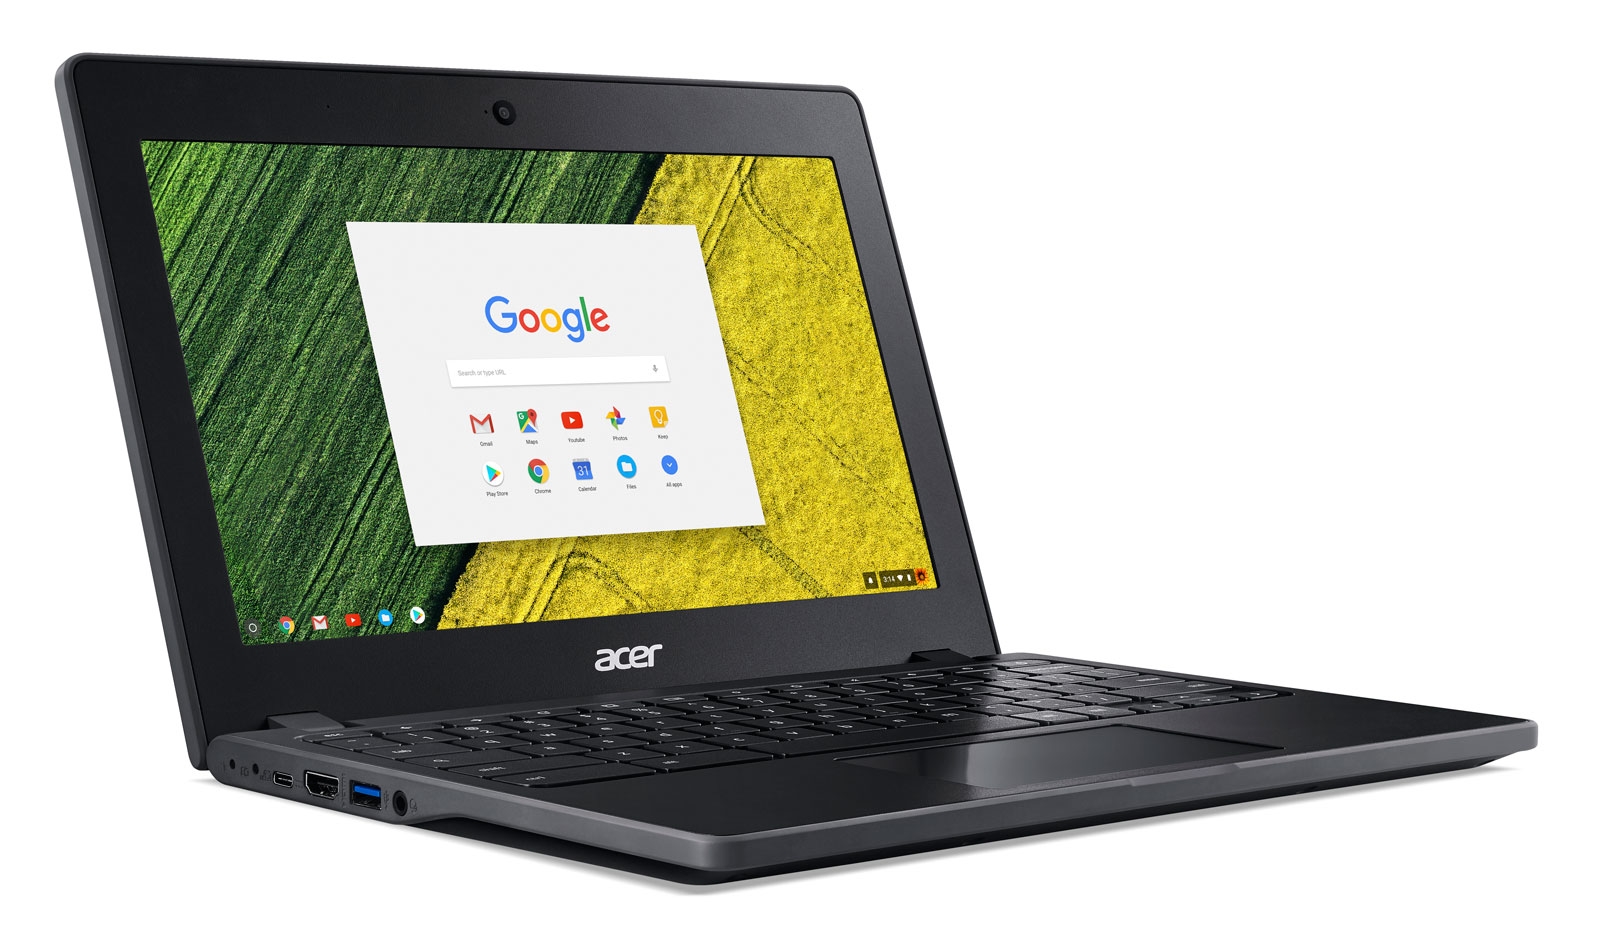 Acer's latest Chromebook packs speed in a tiny rugged body | DeviceDaily.com